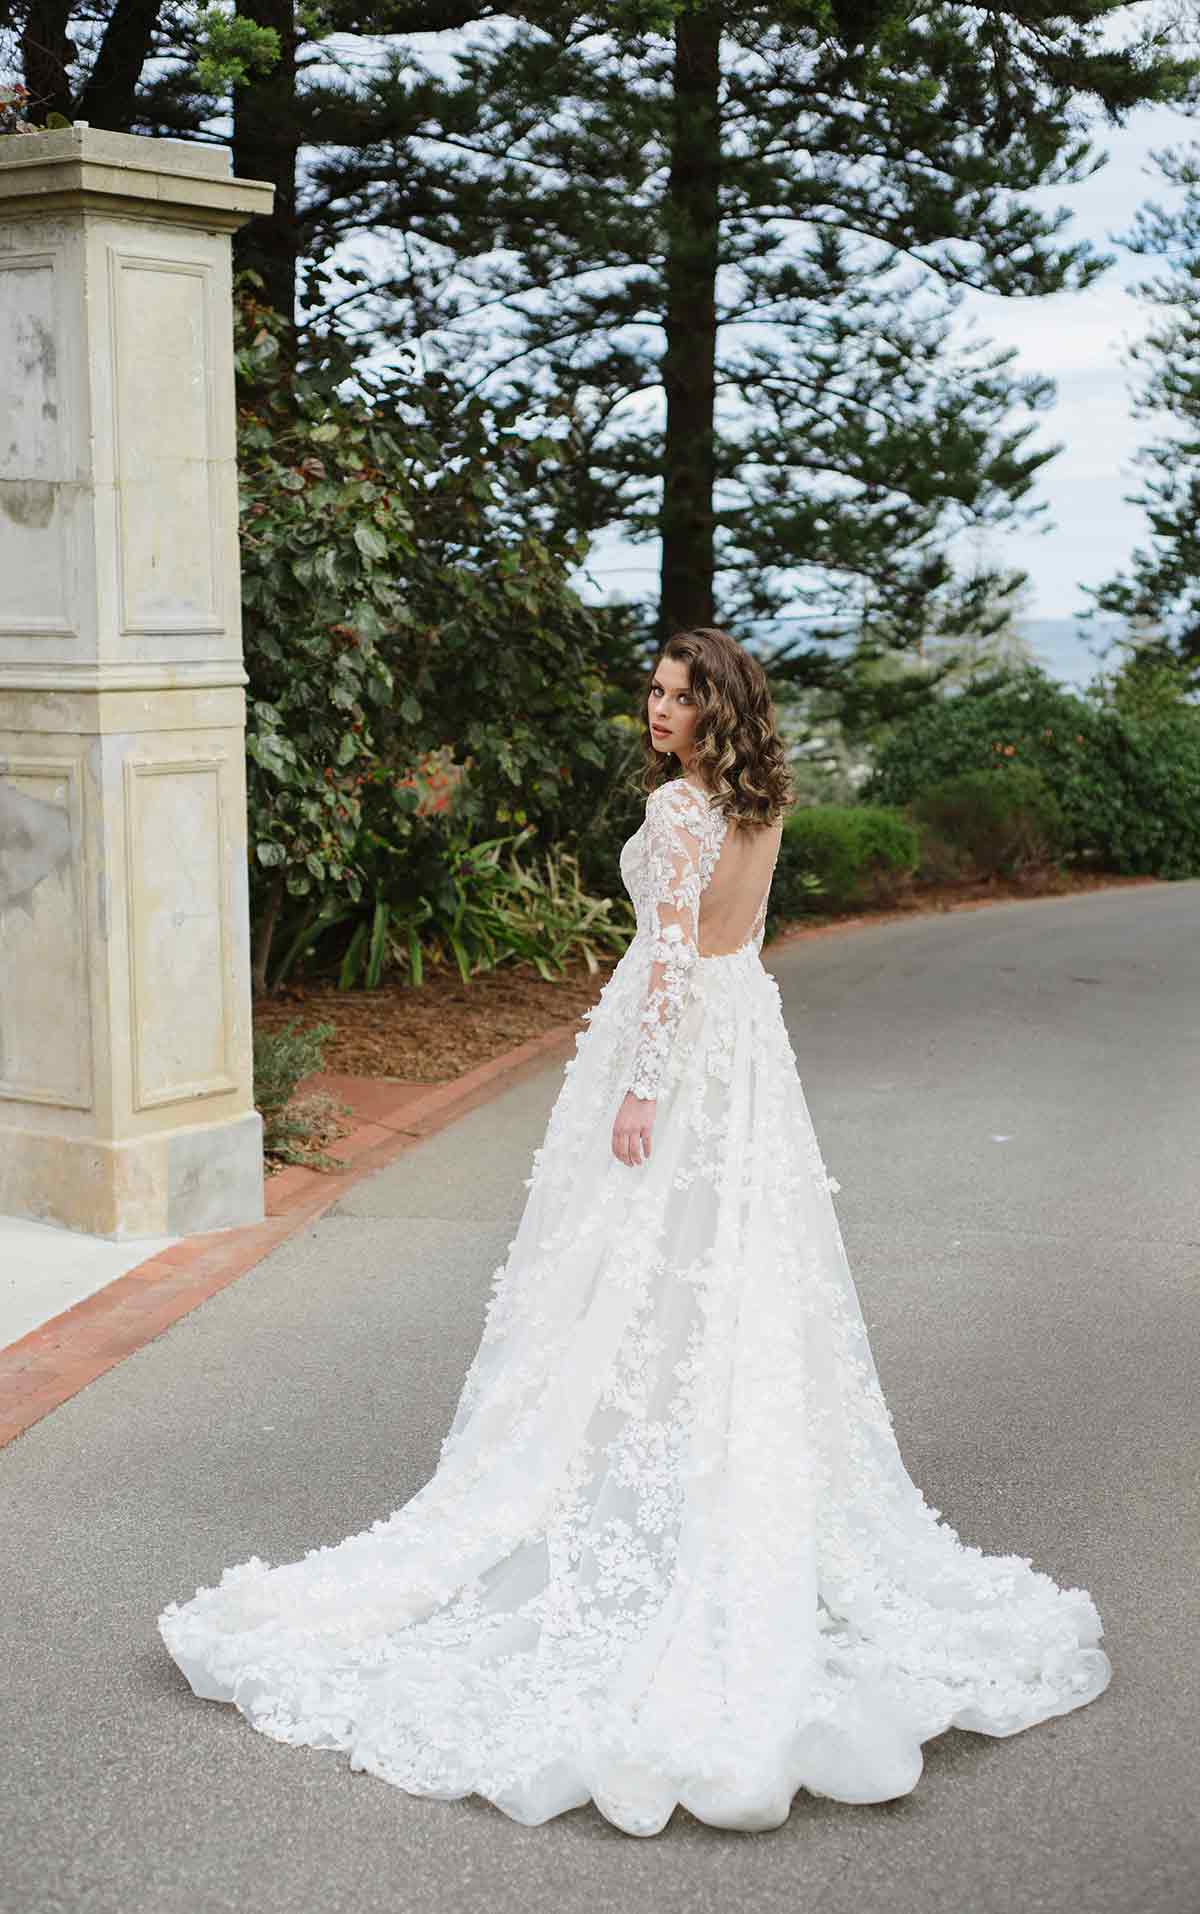 LE1118 3D Floral Lace Wedding Dress with Sleeves by Martina Liana